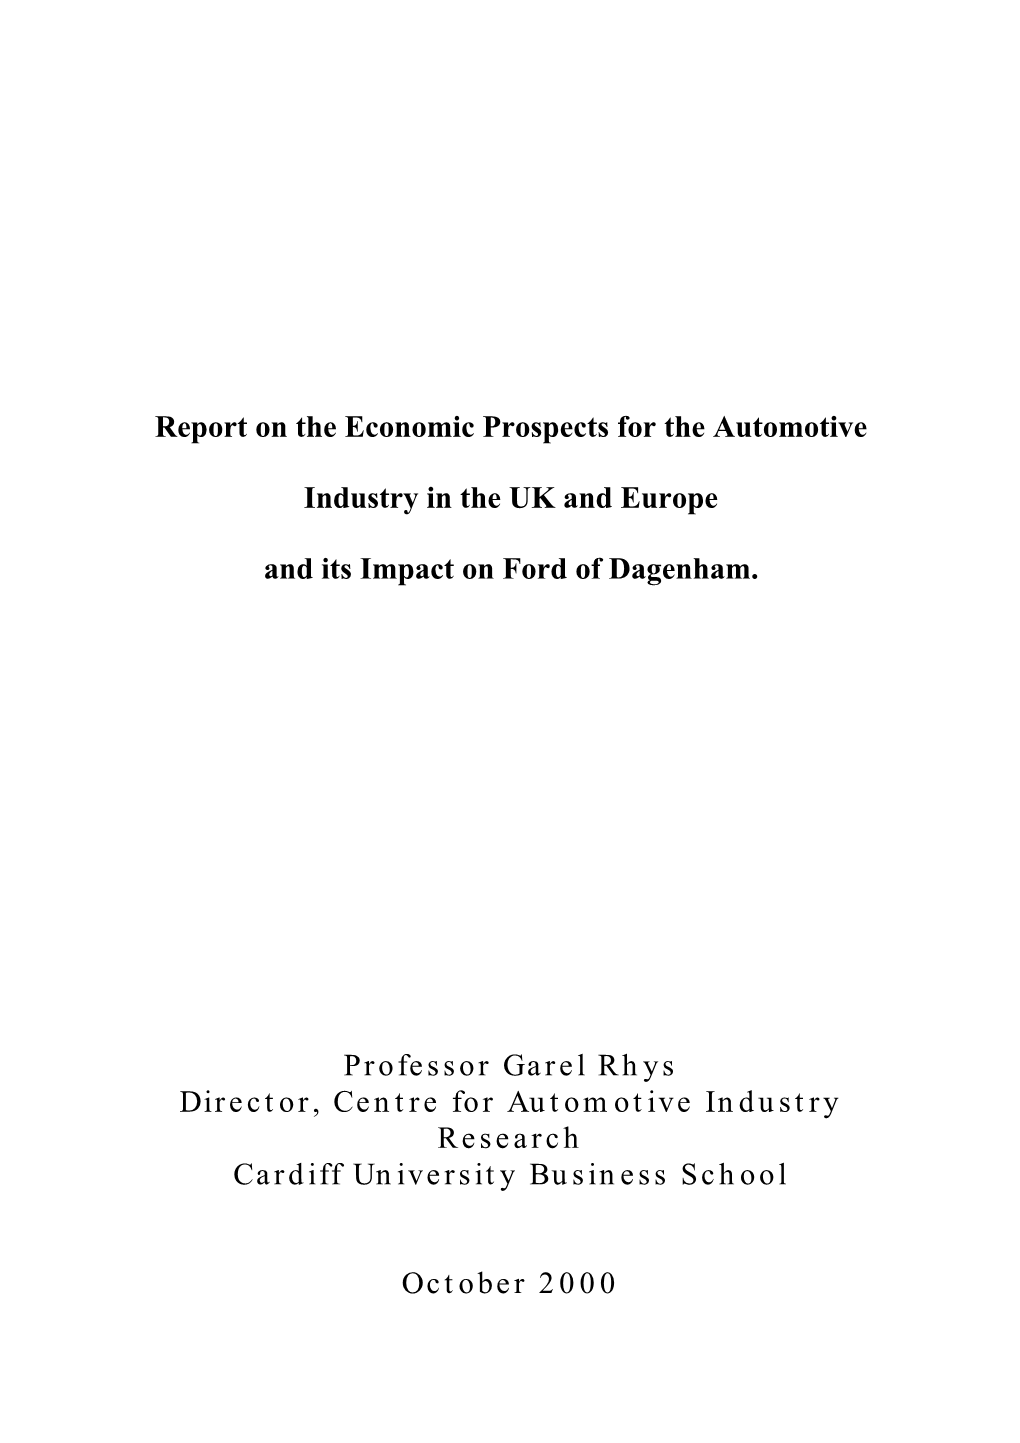 Report on the Economic Prospects for the Automotive Industry in the UK